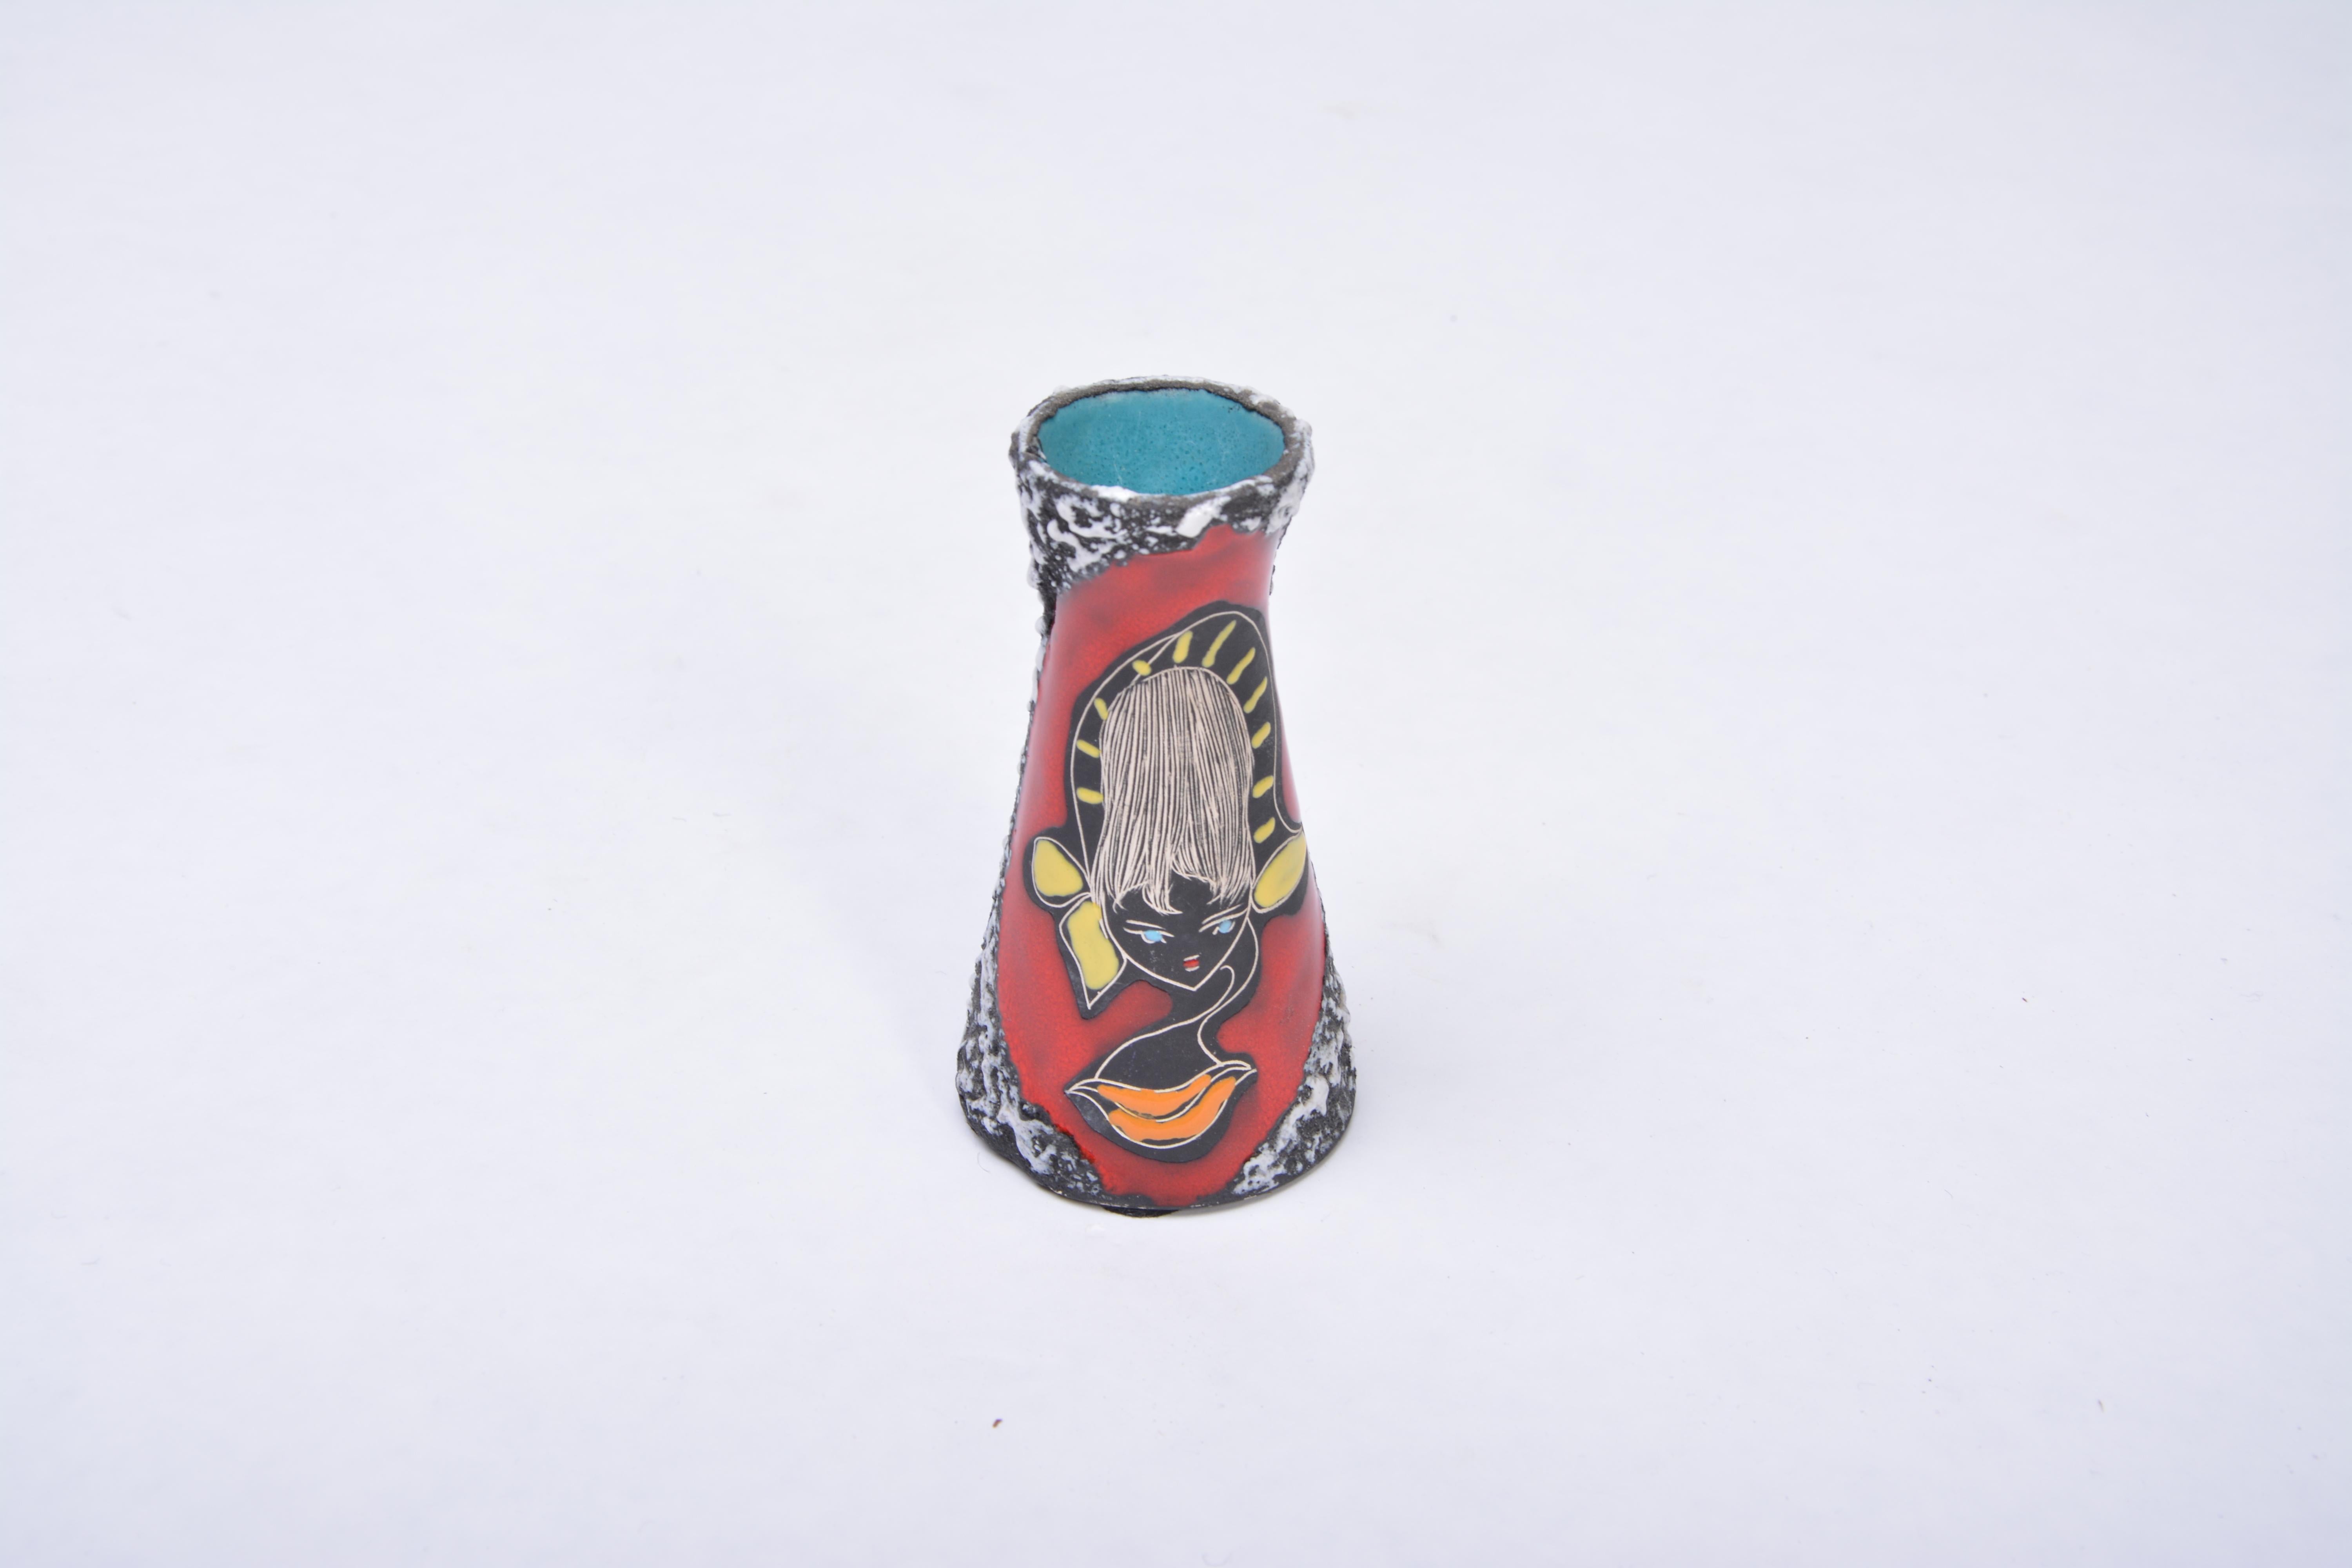 Small Multi-Coloured Midcentury San-Marino Fat Lava Vase
A small Italian midcentury ceramic vase, made in San Marino. This stunning little vase is decorated with a sgraffito ladies head and beautifully colored enameled glossy glazes. The vase is